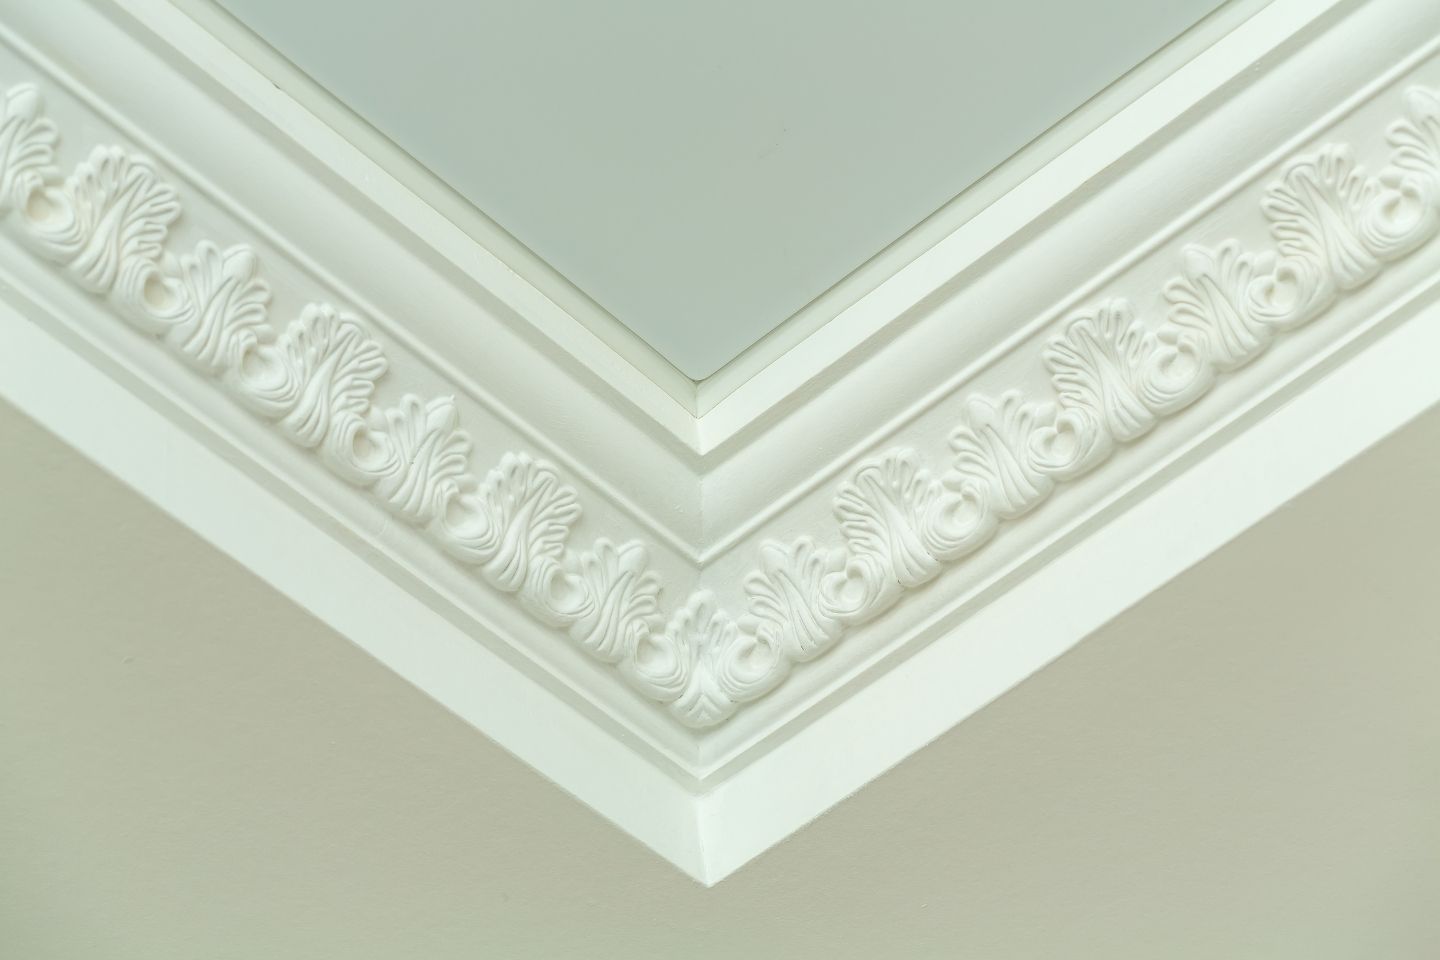 Victorian style crown moulding inside home